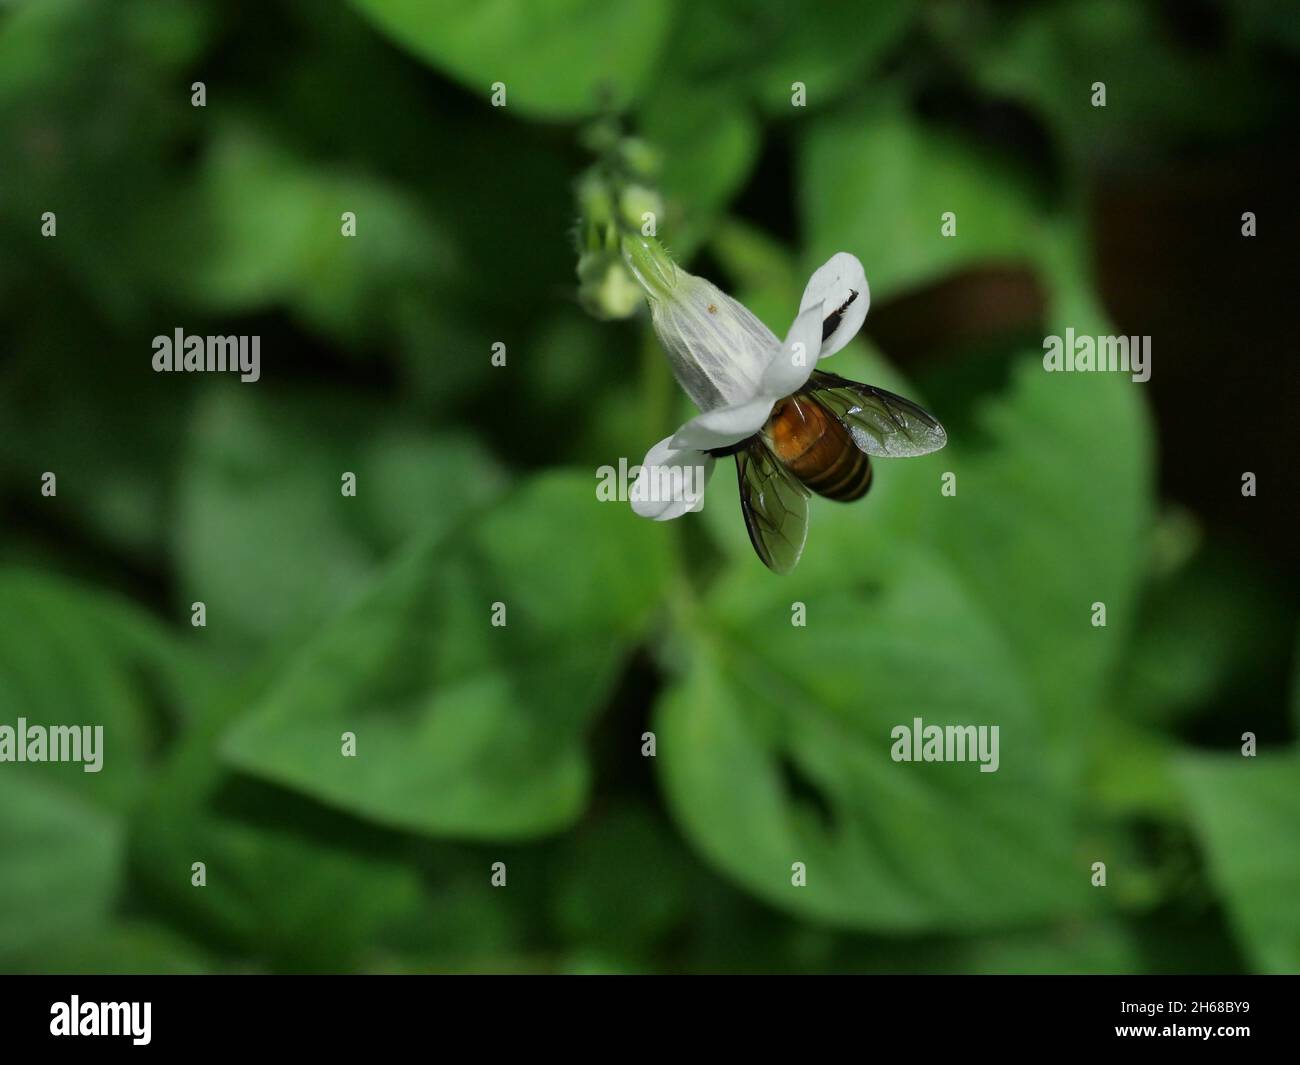 Giant honey bee seeking nectar on white Chinese violet or coromandel or creeping foxglove ( Asystasia gangetica ) blossom in field with natural green, Stock Photo